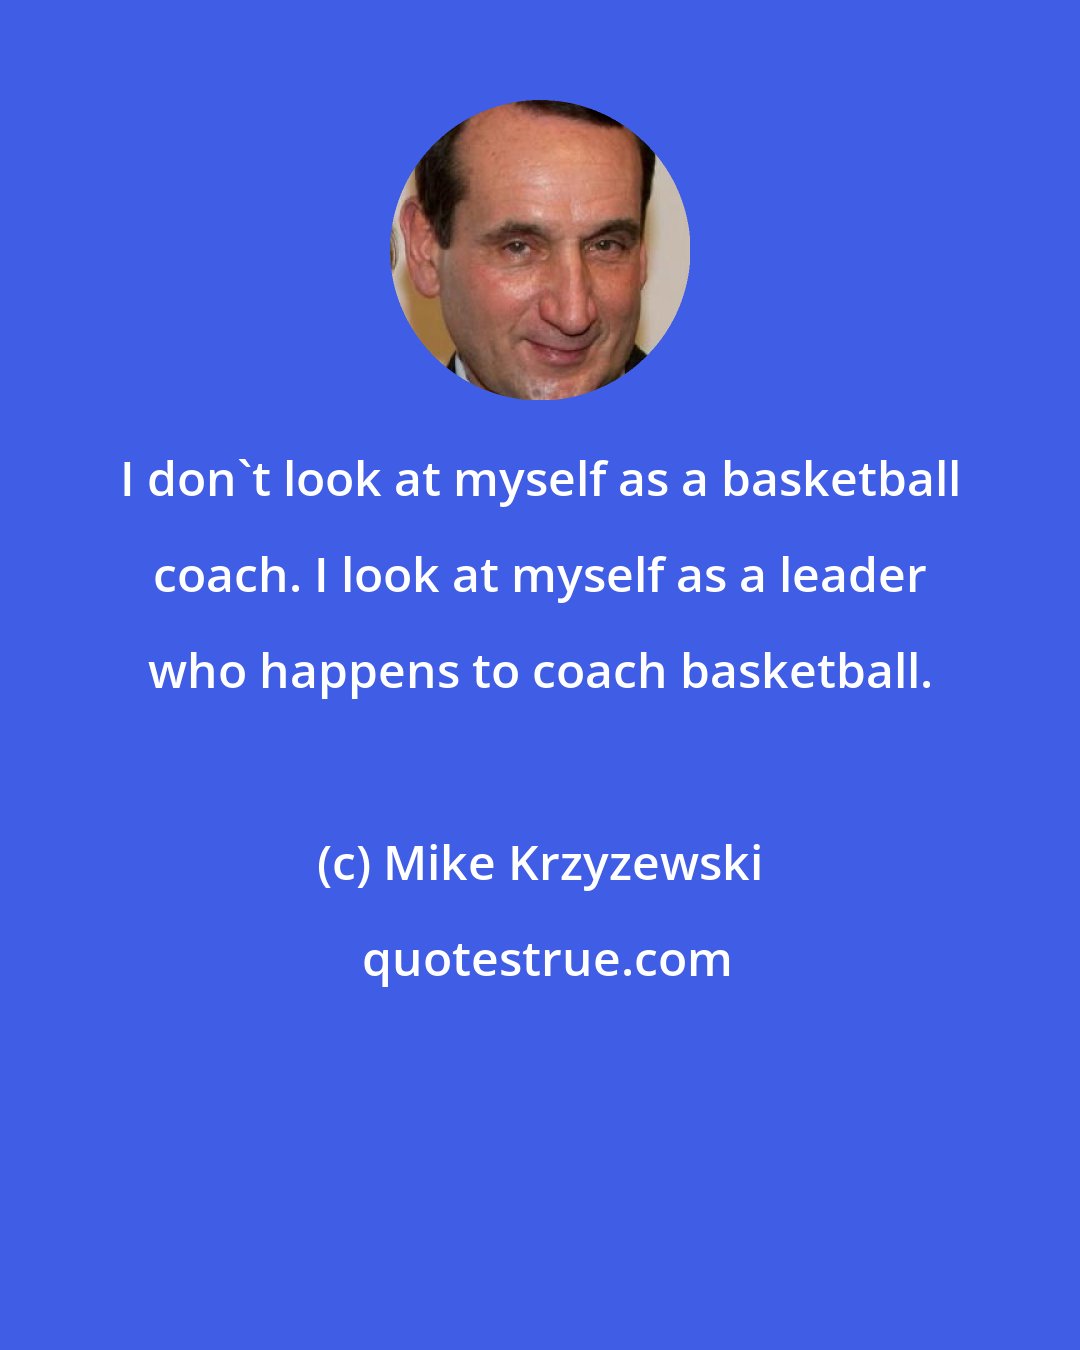 Mike Krzyzewski: I don't look at myself as a basketball coach. I look at myself as a leader who happens to coach basketball.